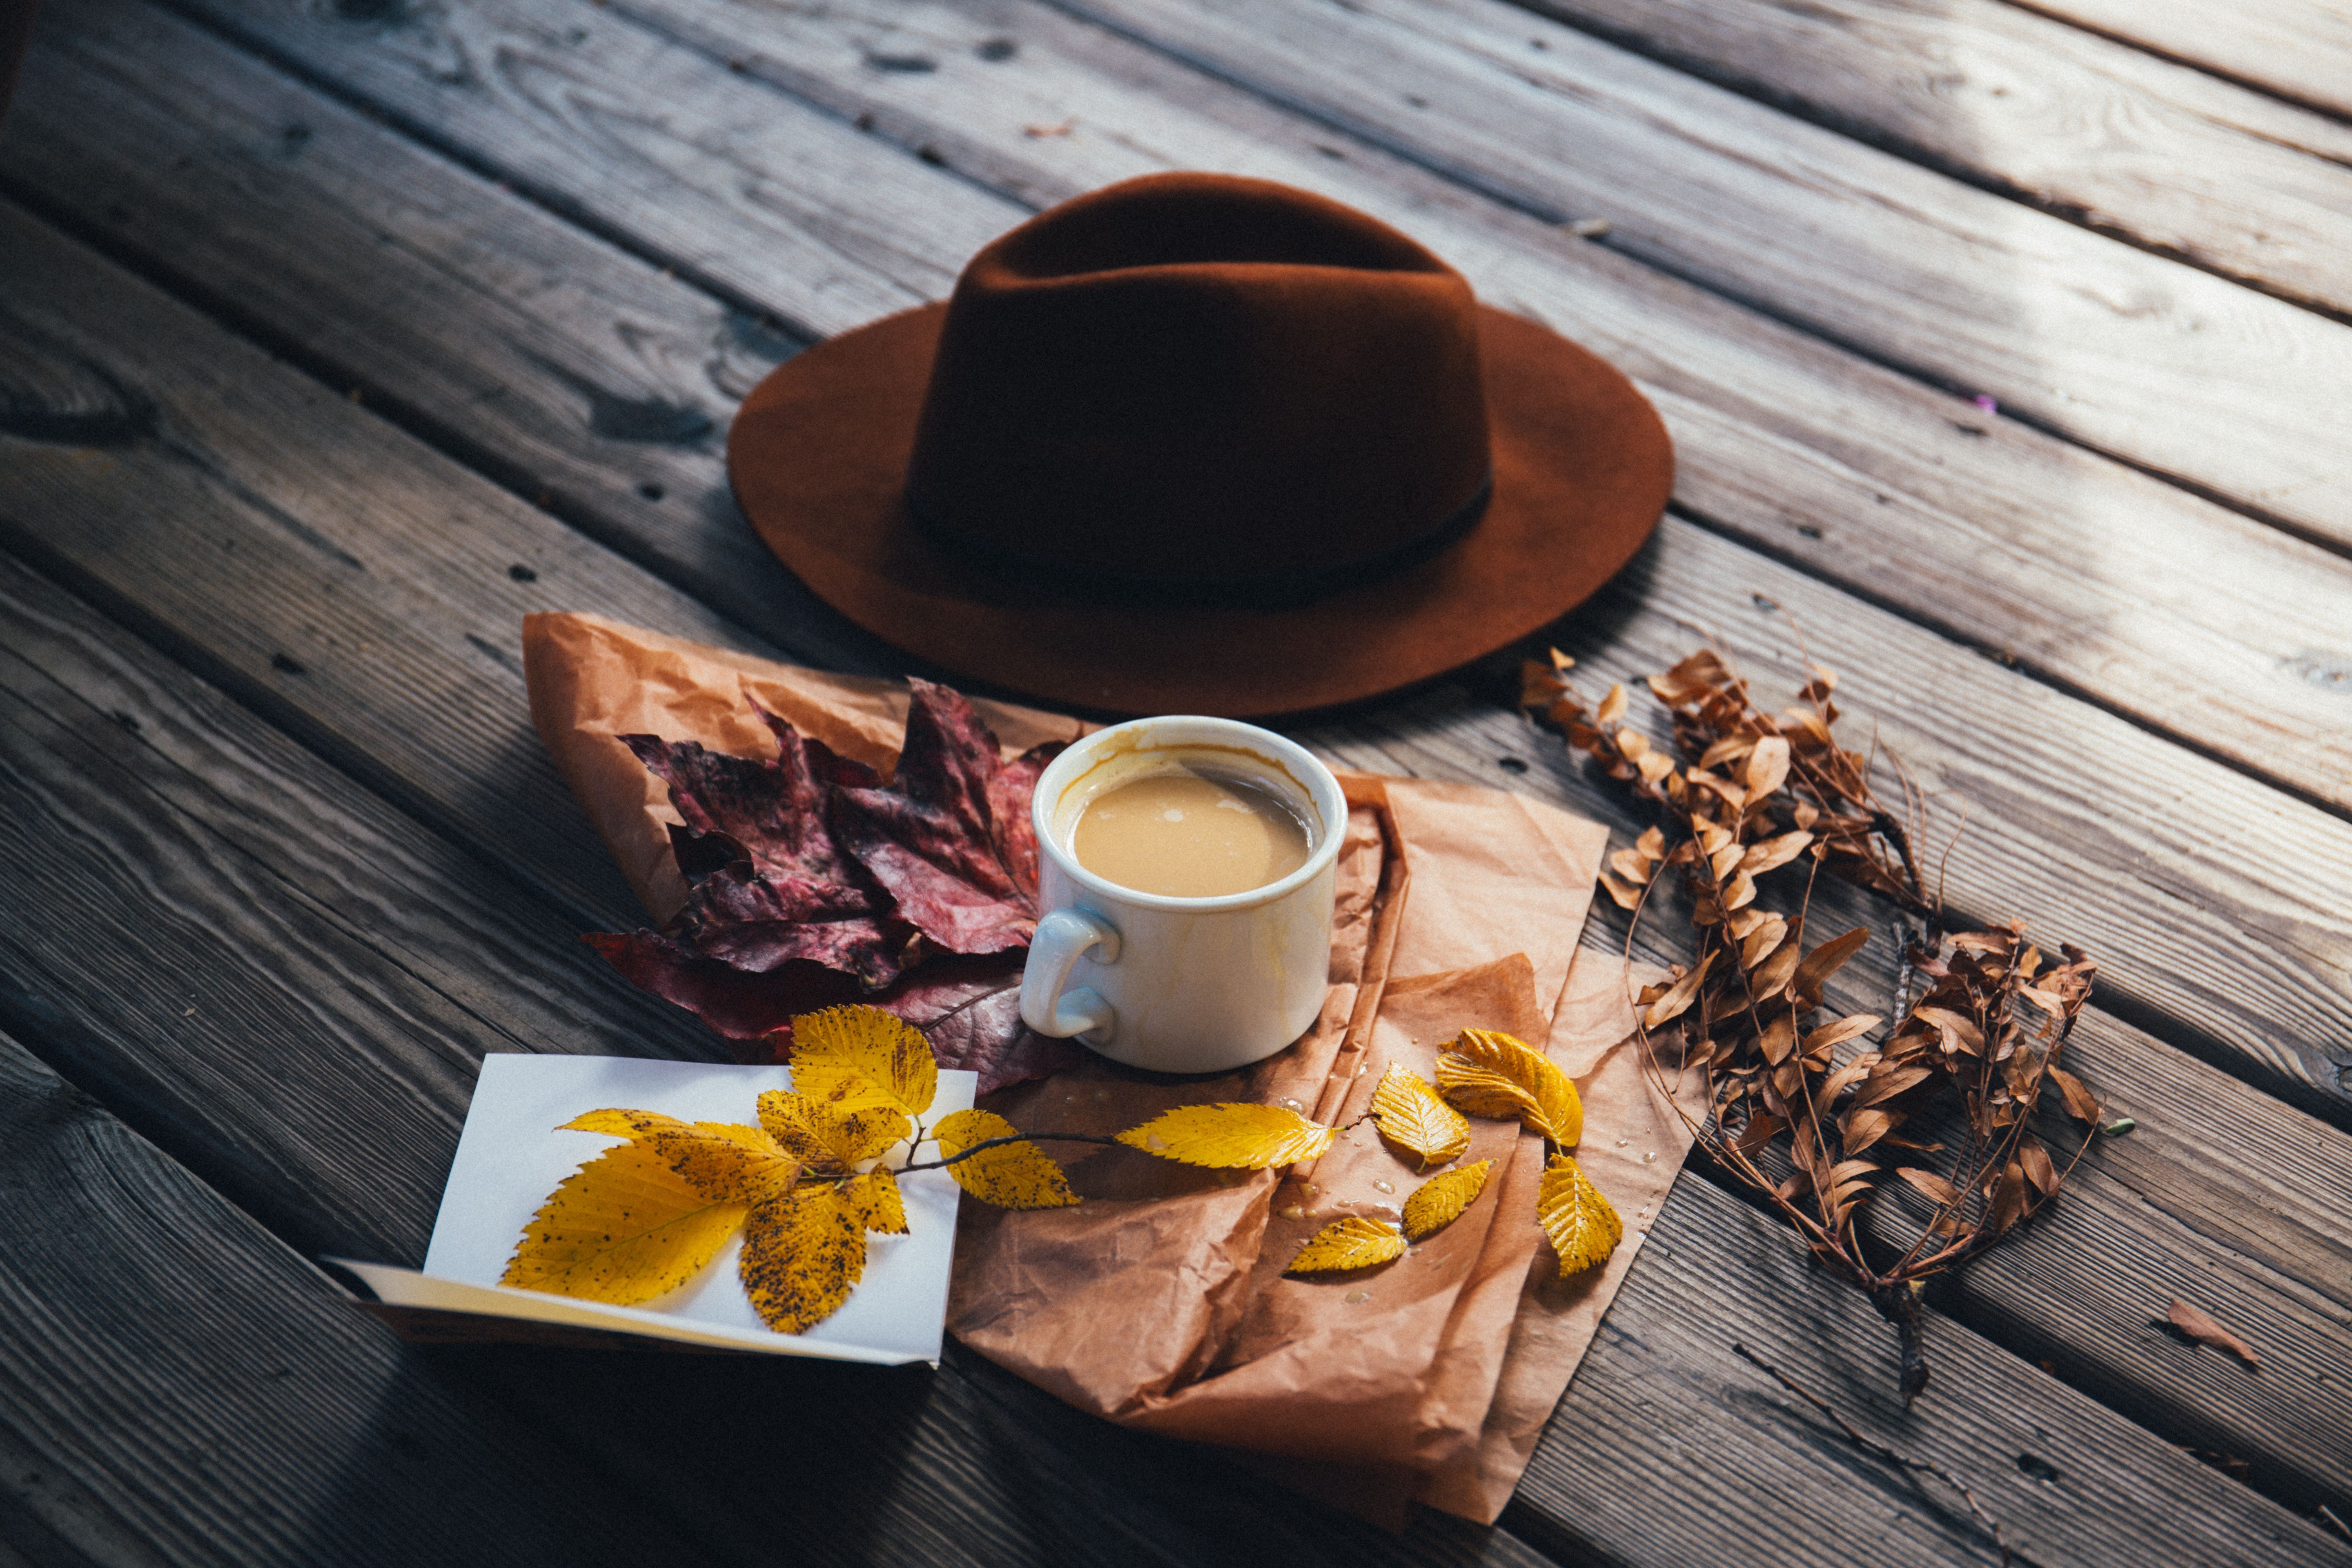 5760x3840 #fall styling, #fall, #leafe, #fall outfit, #hat, #table, #notebook, #leaf, #paper, #note, #orange, #wood, #cup, #brown, #Free image, #coffee, #floor, #autumn, #outfit, #red, #fall color. Mocah.org HD Desktop Wallpaper